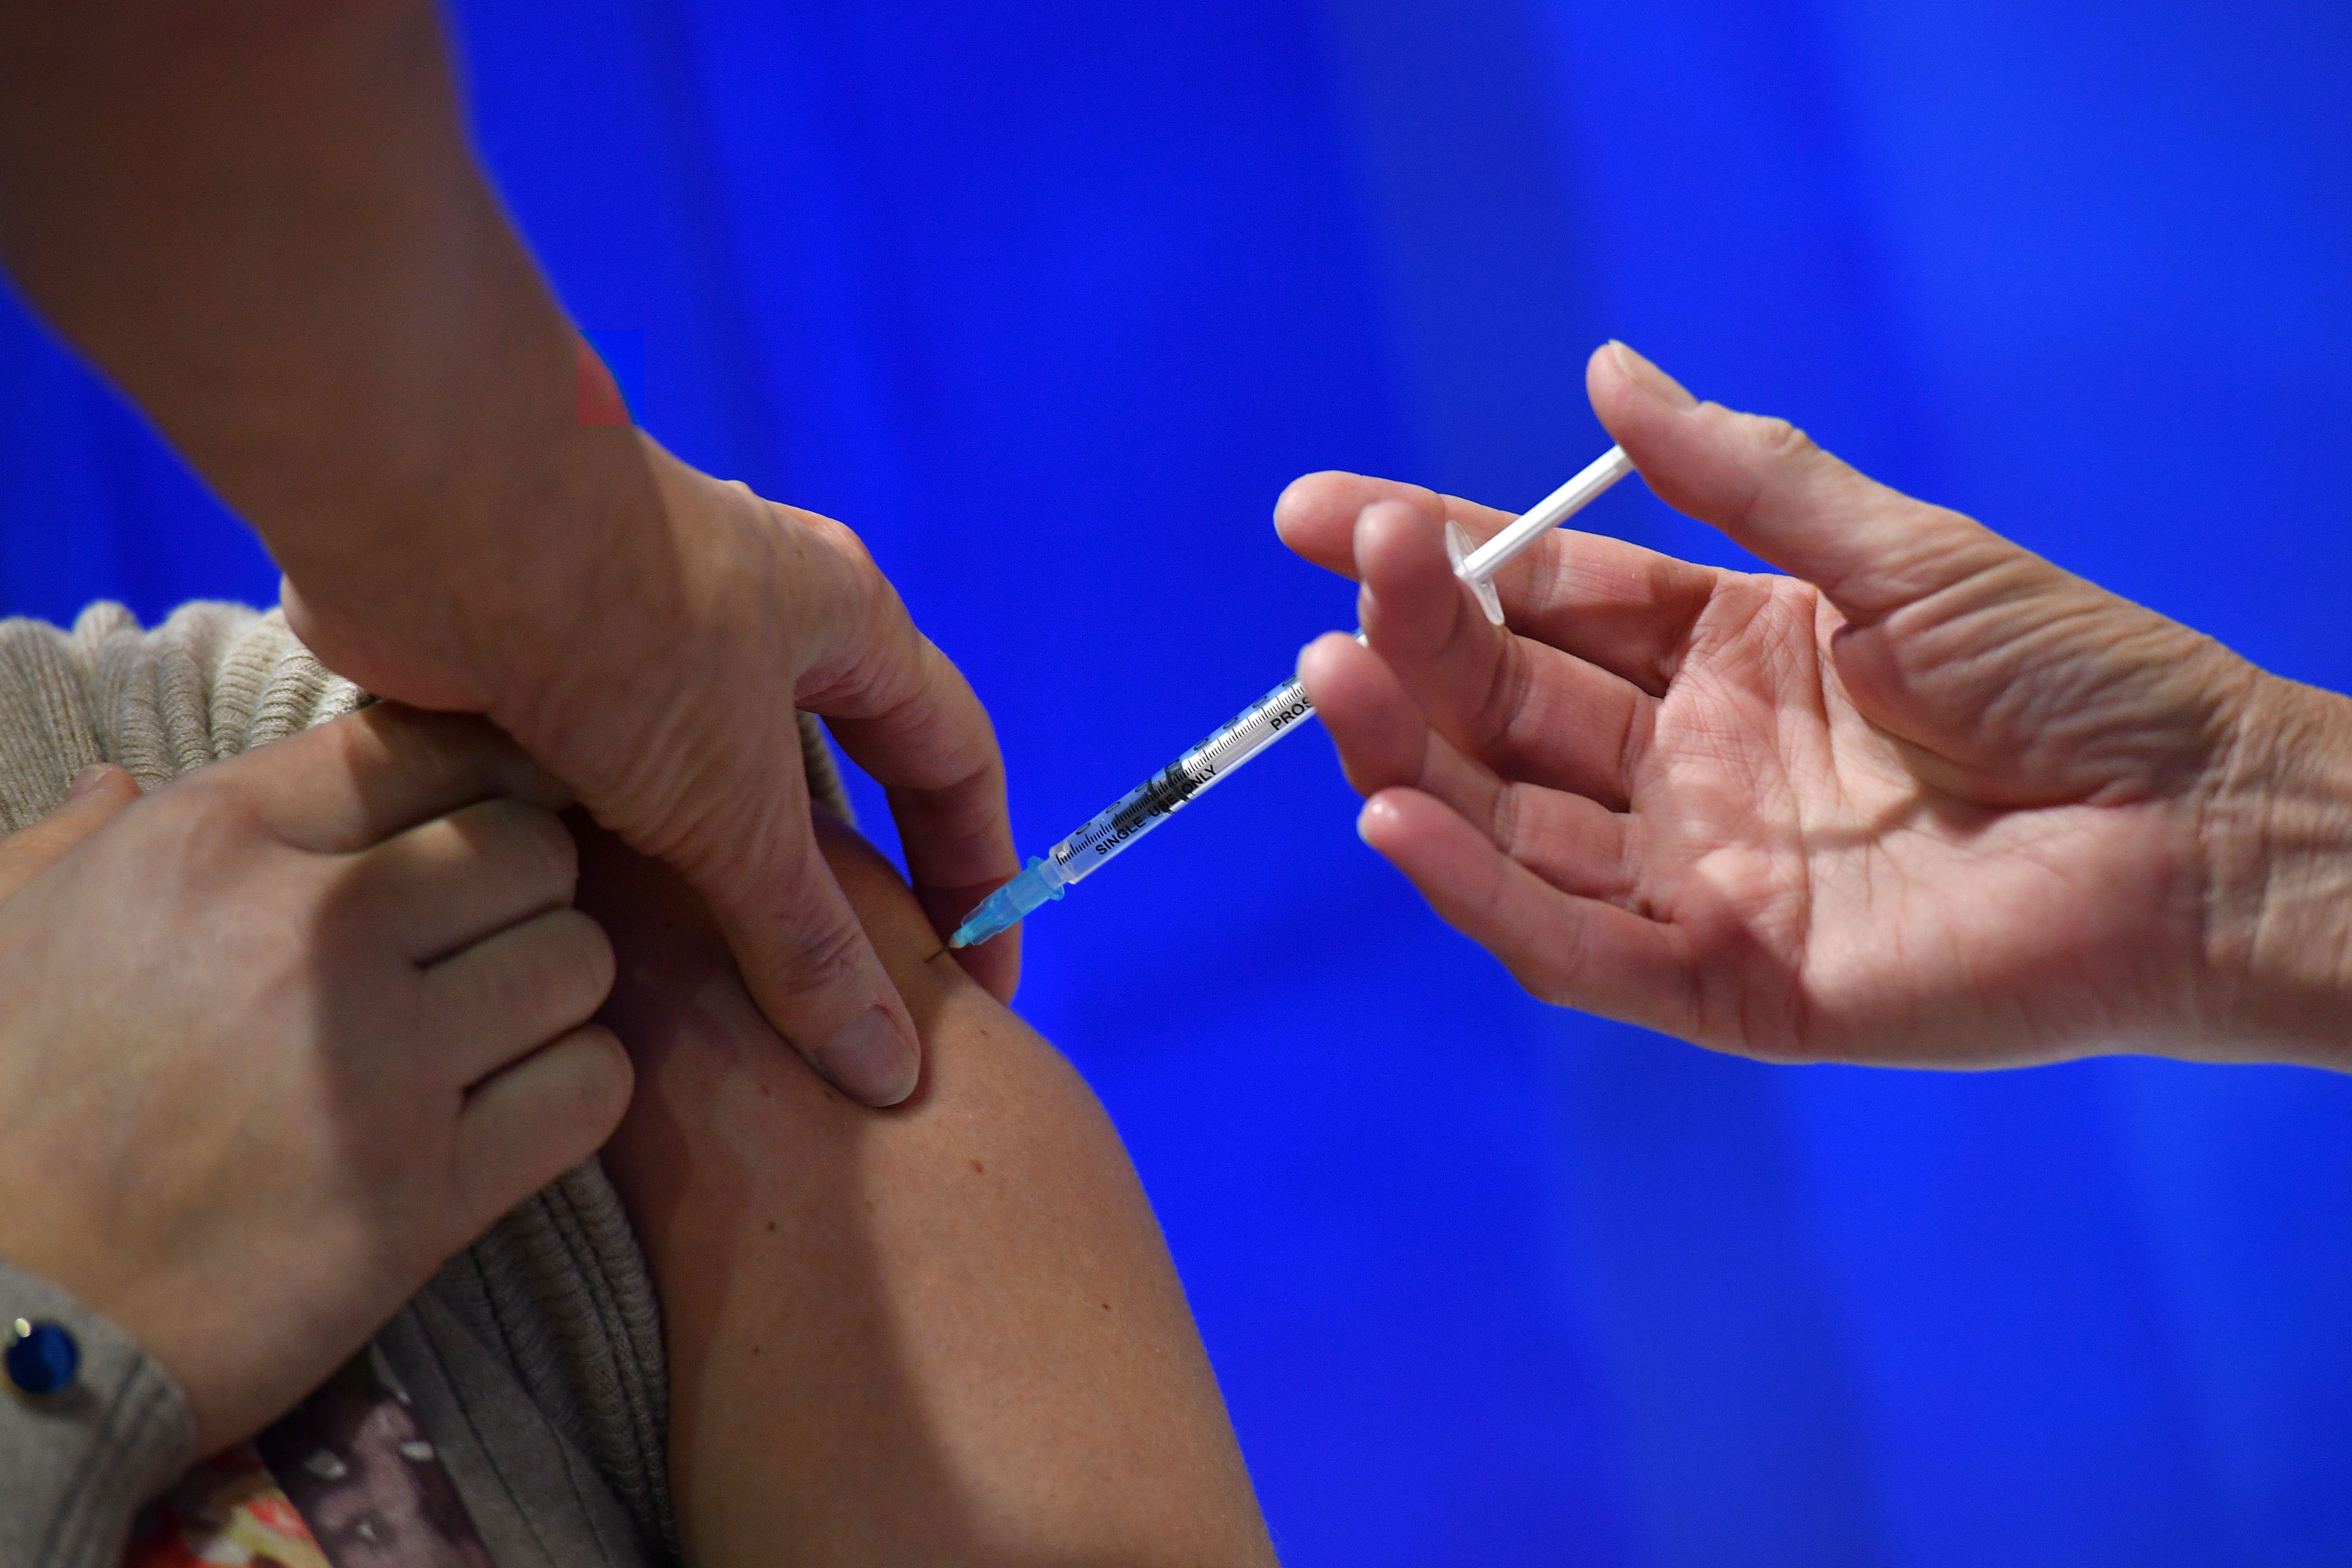 A person in Cardiff, Wales, receives an injection of the Pfizer-BioNTech Covid-19 vaccine on December 8.